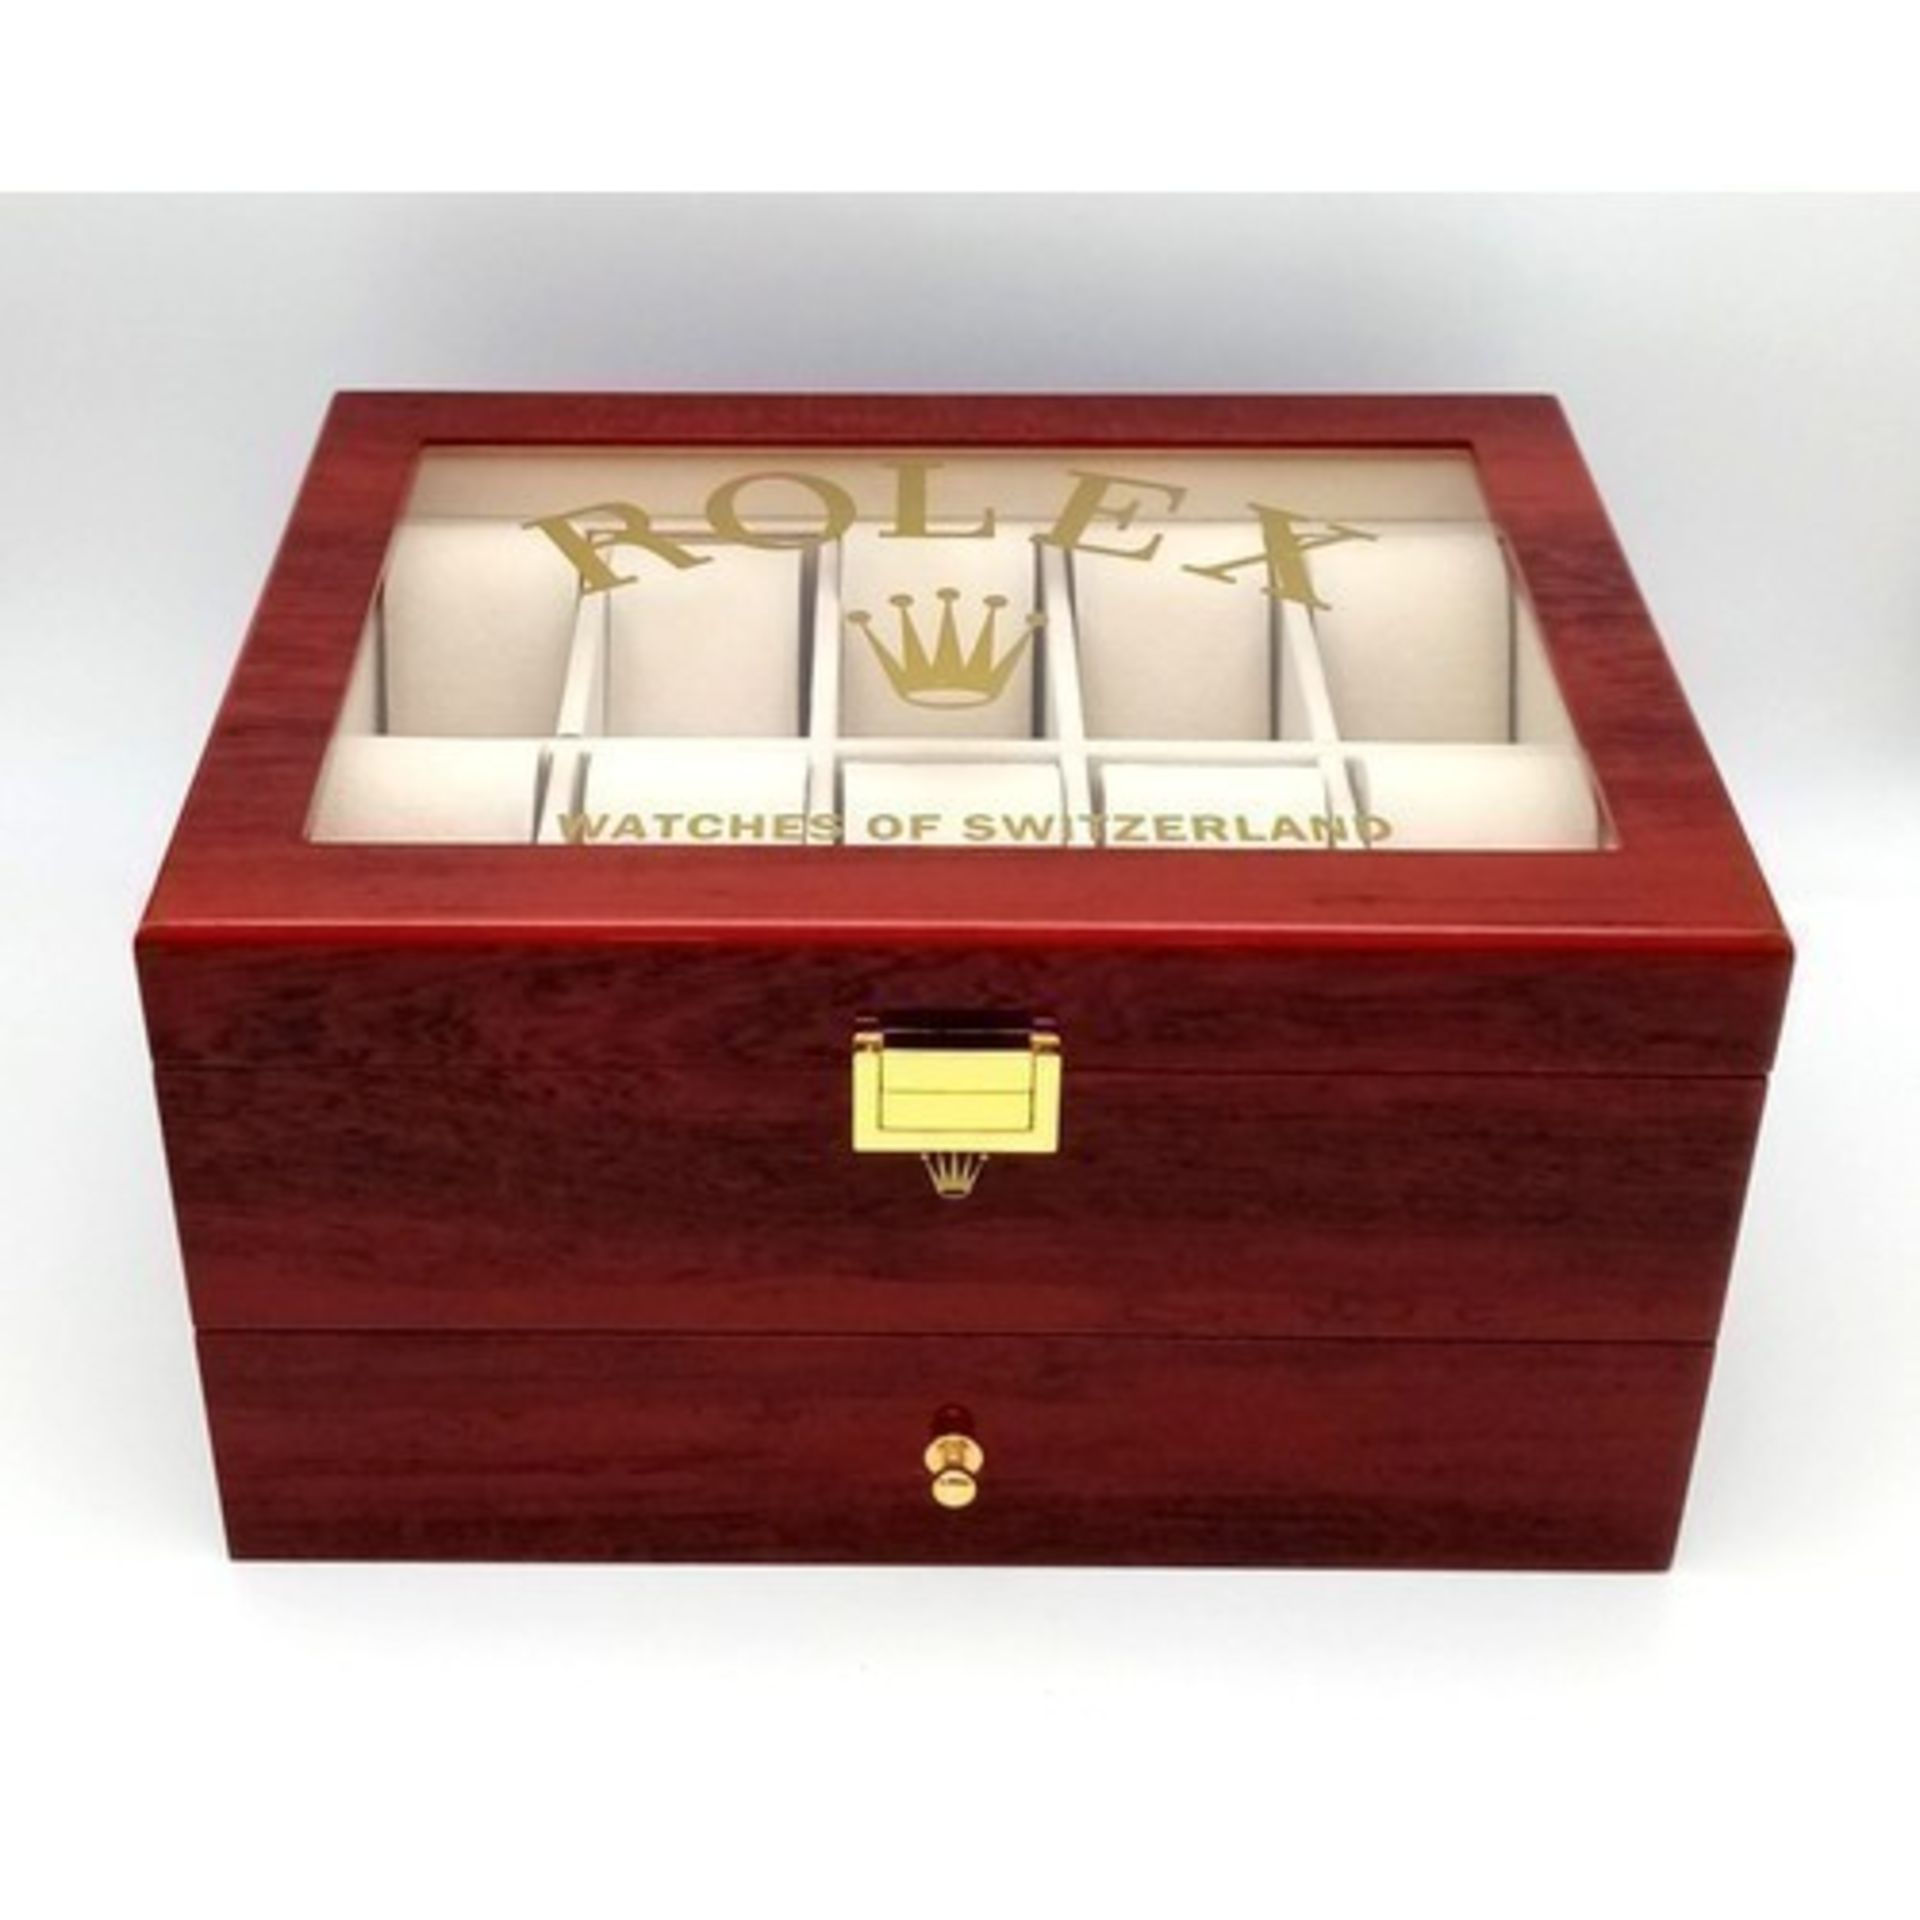 A Two-Tier Elite Watch Display Case - Perfect for Rolex Watches. 20 plush watch spaces on two - Image 2 of 3